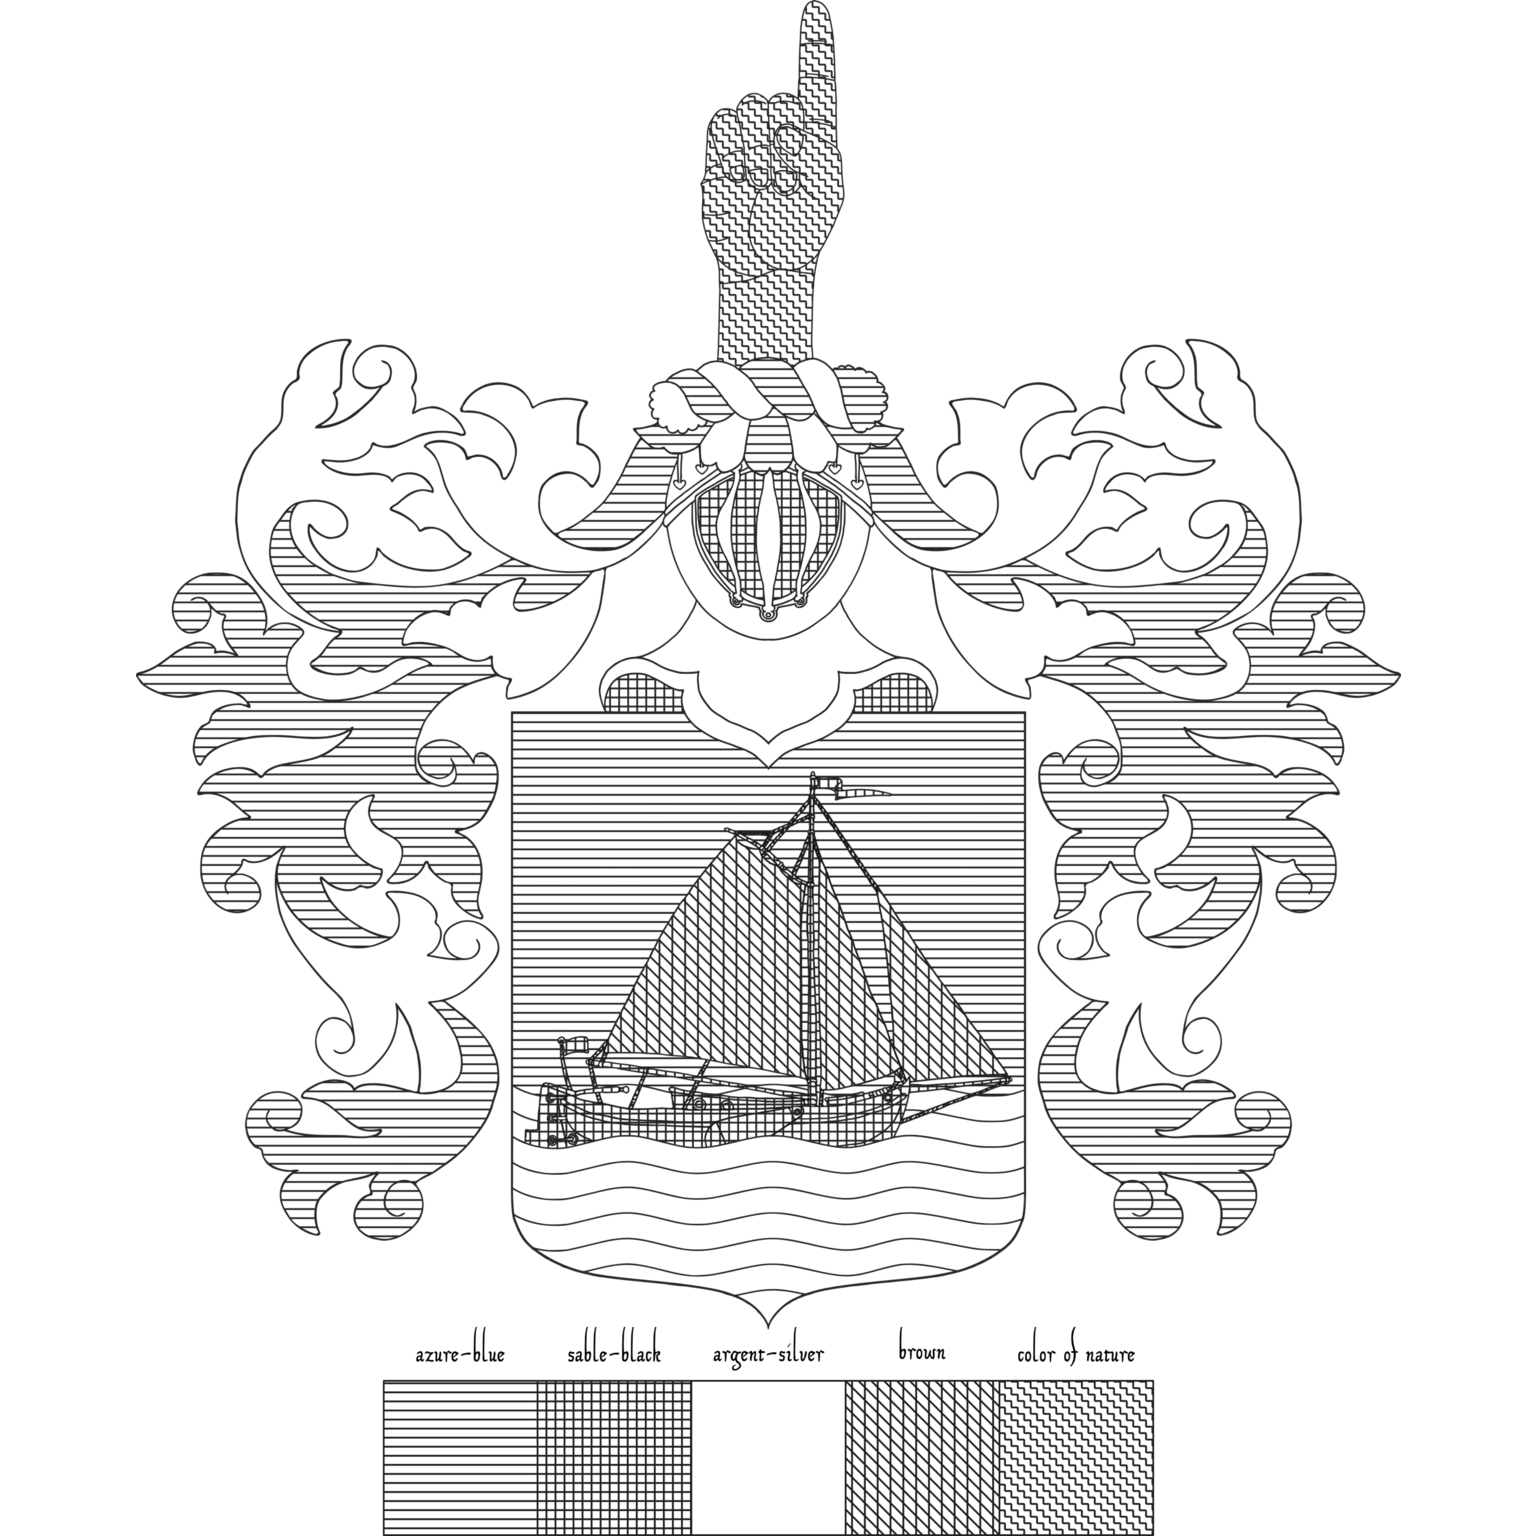 Azure, a Turftjalk ship sailing to sinister proper on waves of the sea Argent. Crest: Upon helm affronty, barred  Argent, lined Sable, with a wreath Argent and Azure, a dexter hand couped proper pointing upwards. Mantling: Azure doubled Argent.